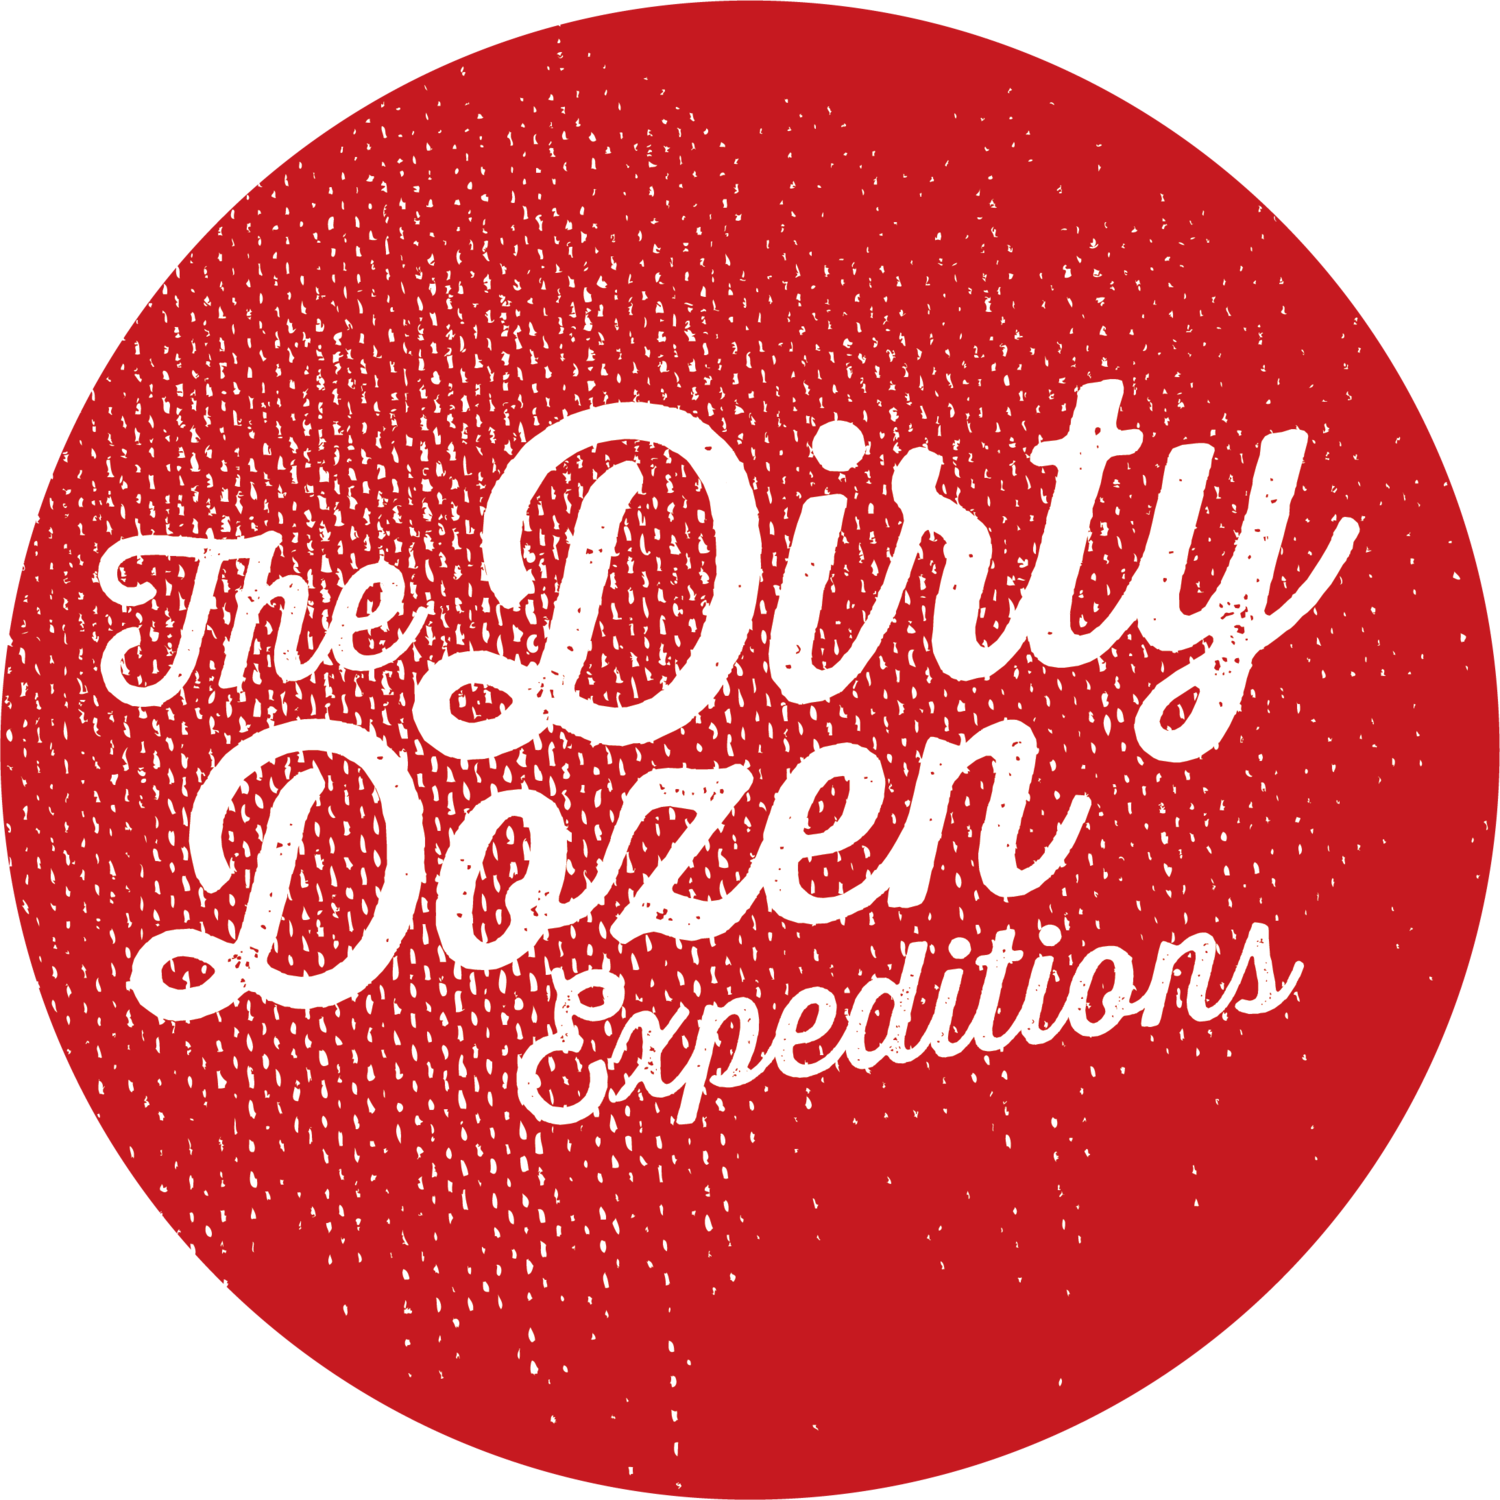 The Dirty Dozen Expeditions